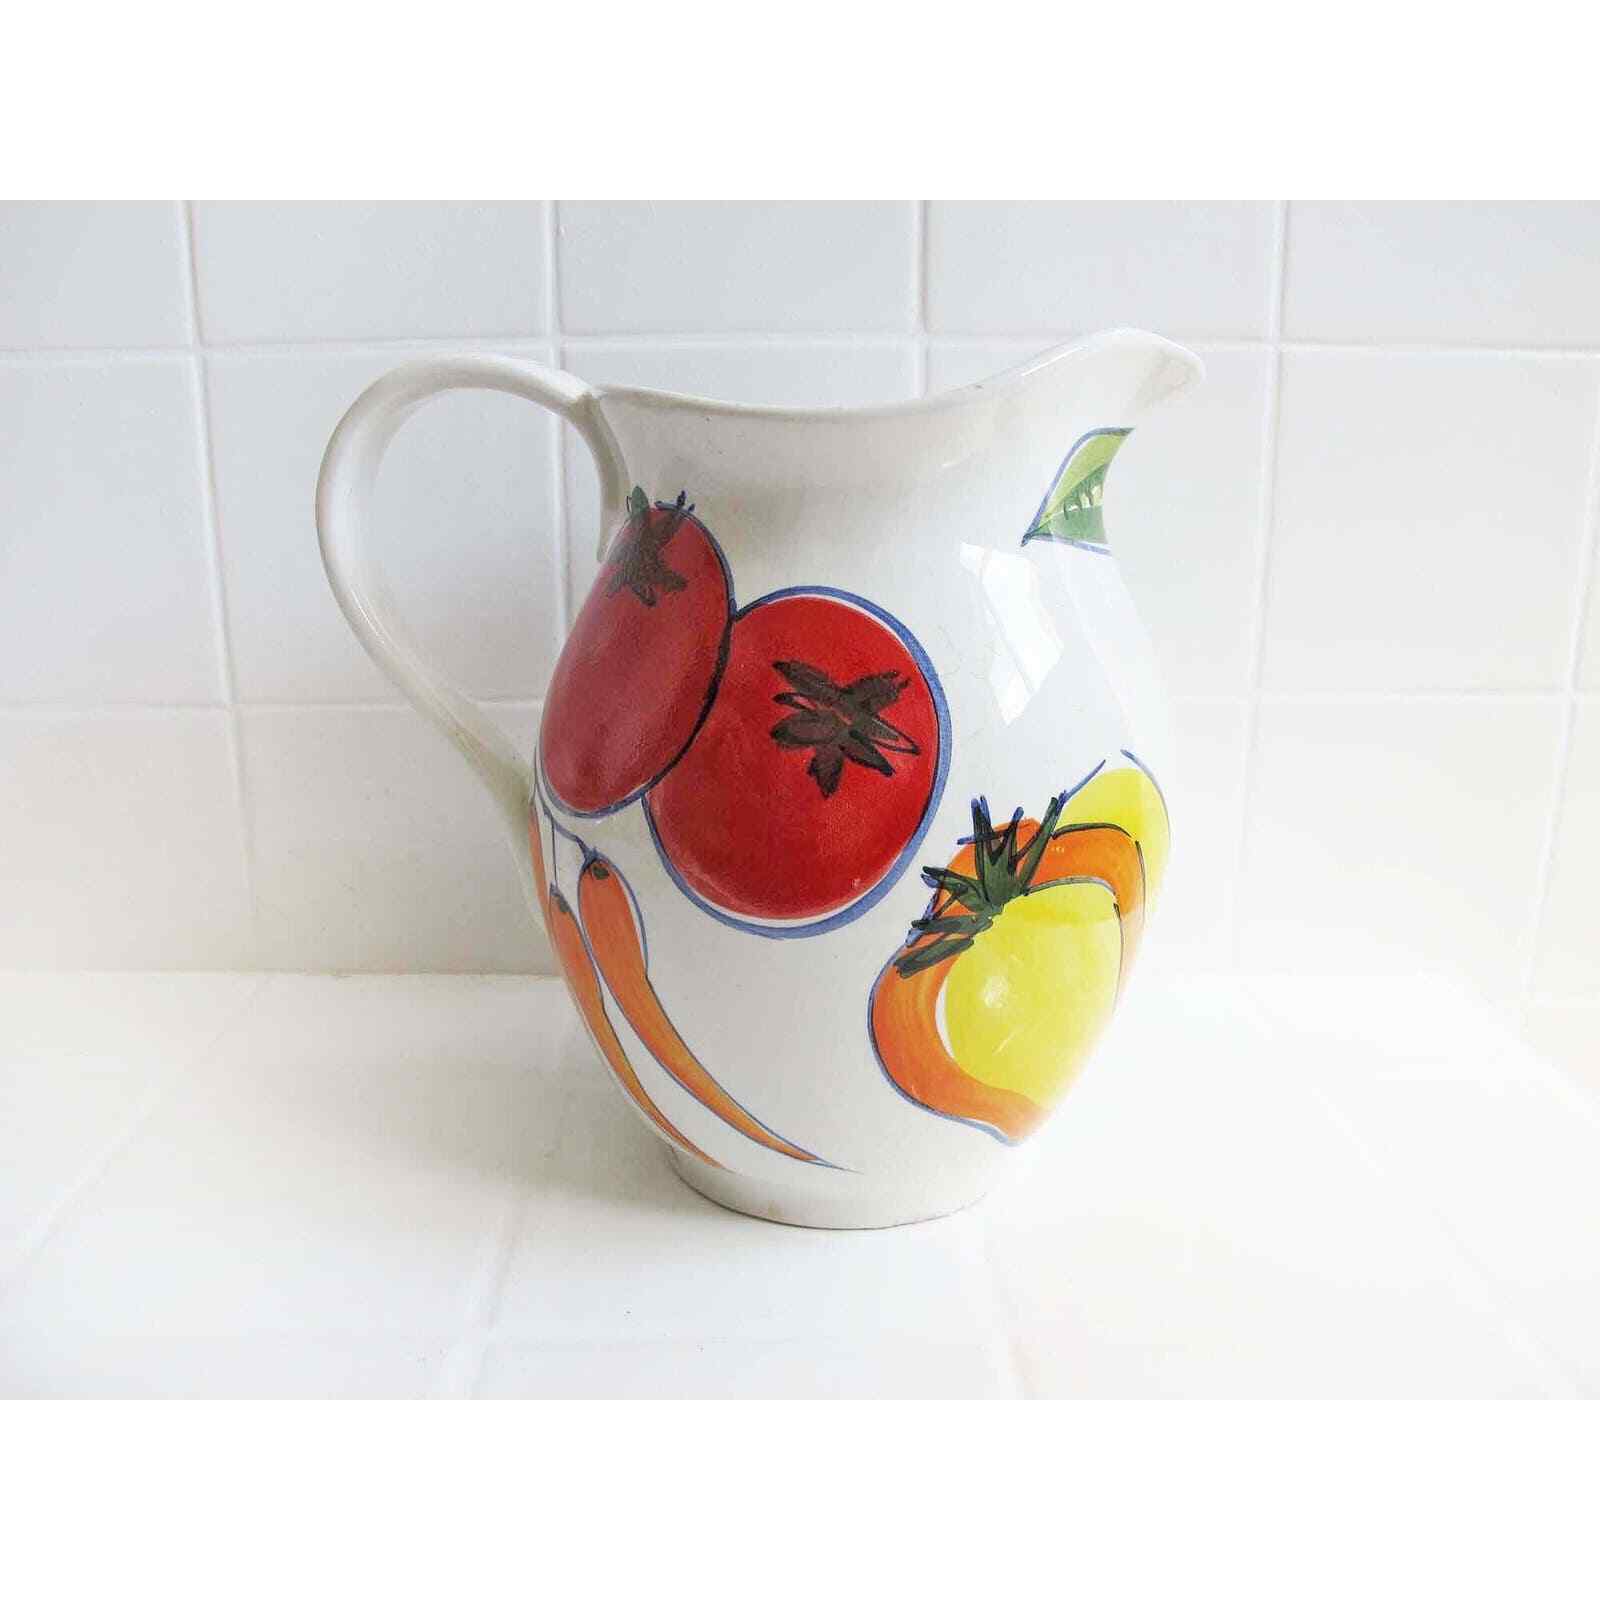 Vtg Italian Hand Painted Vegetable Ceramic Pitcher Made in Italy Colorful Tomato